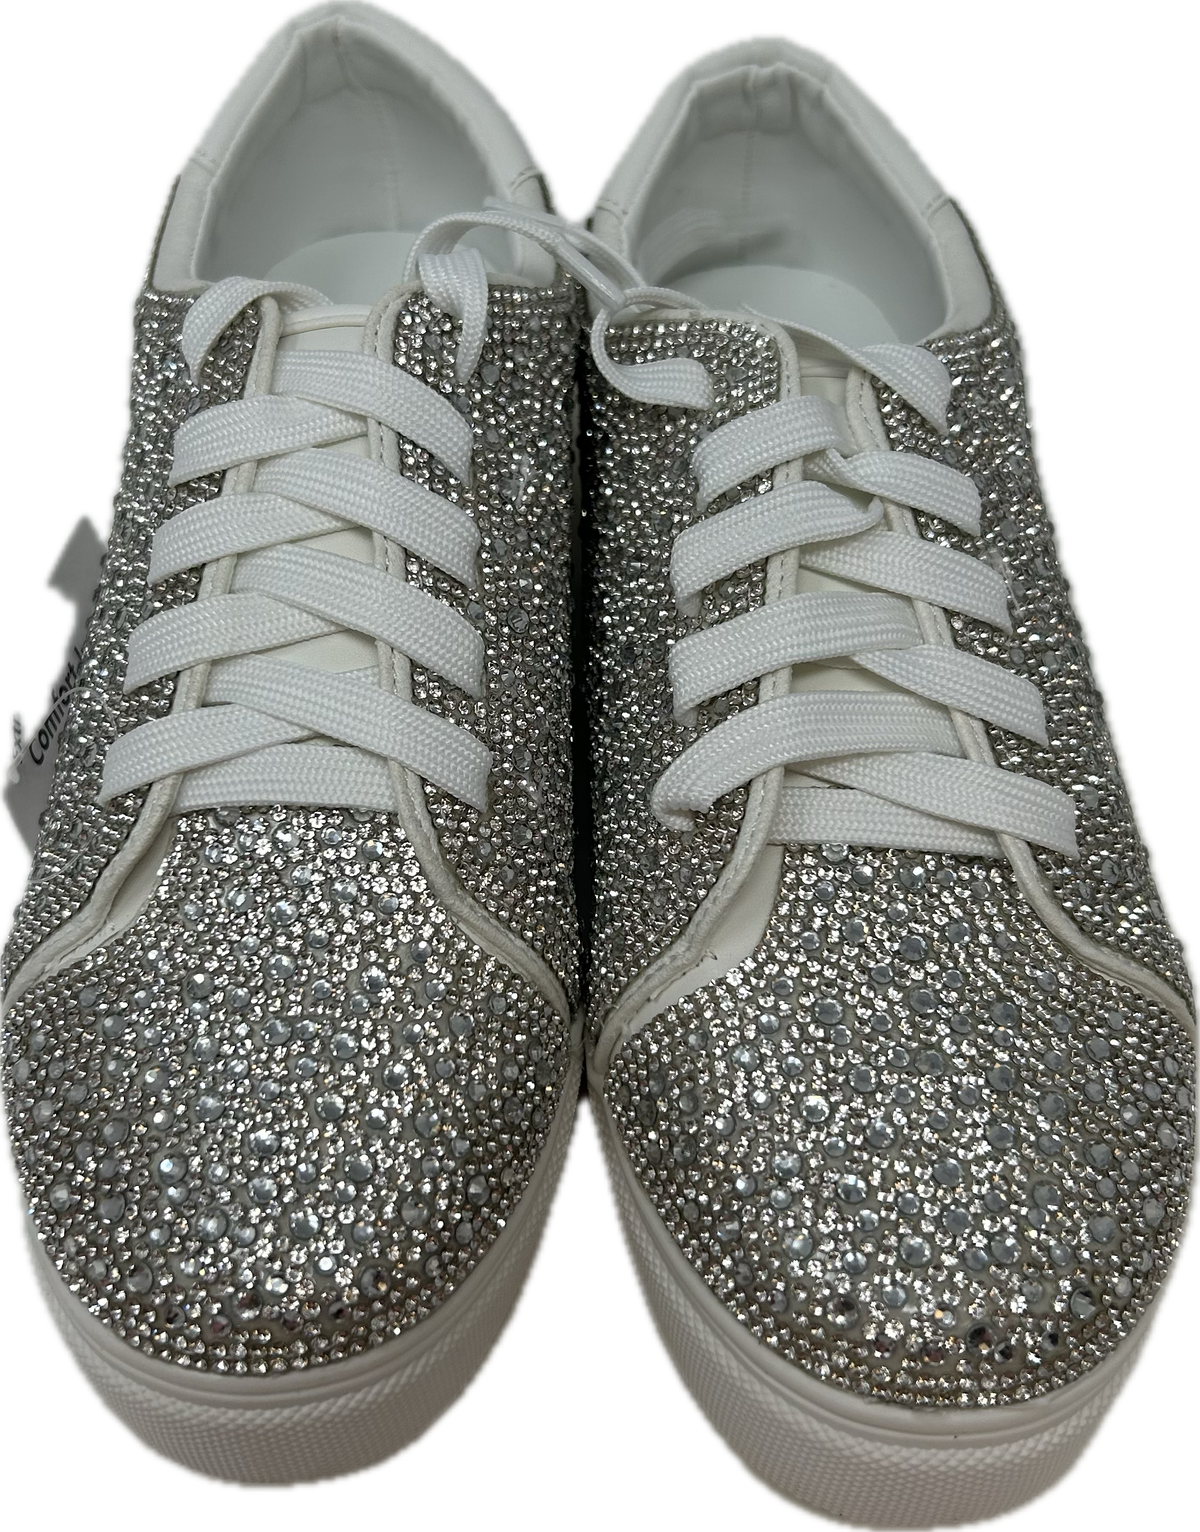 White Bedazzled Tennis Shoe